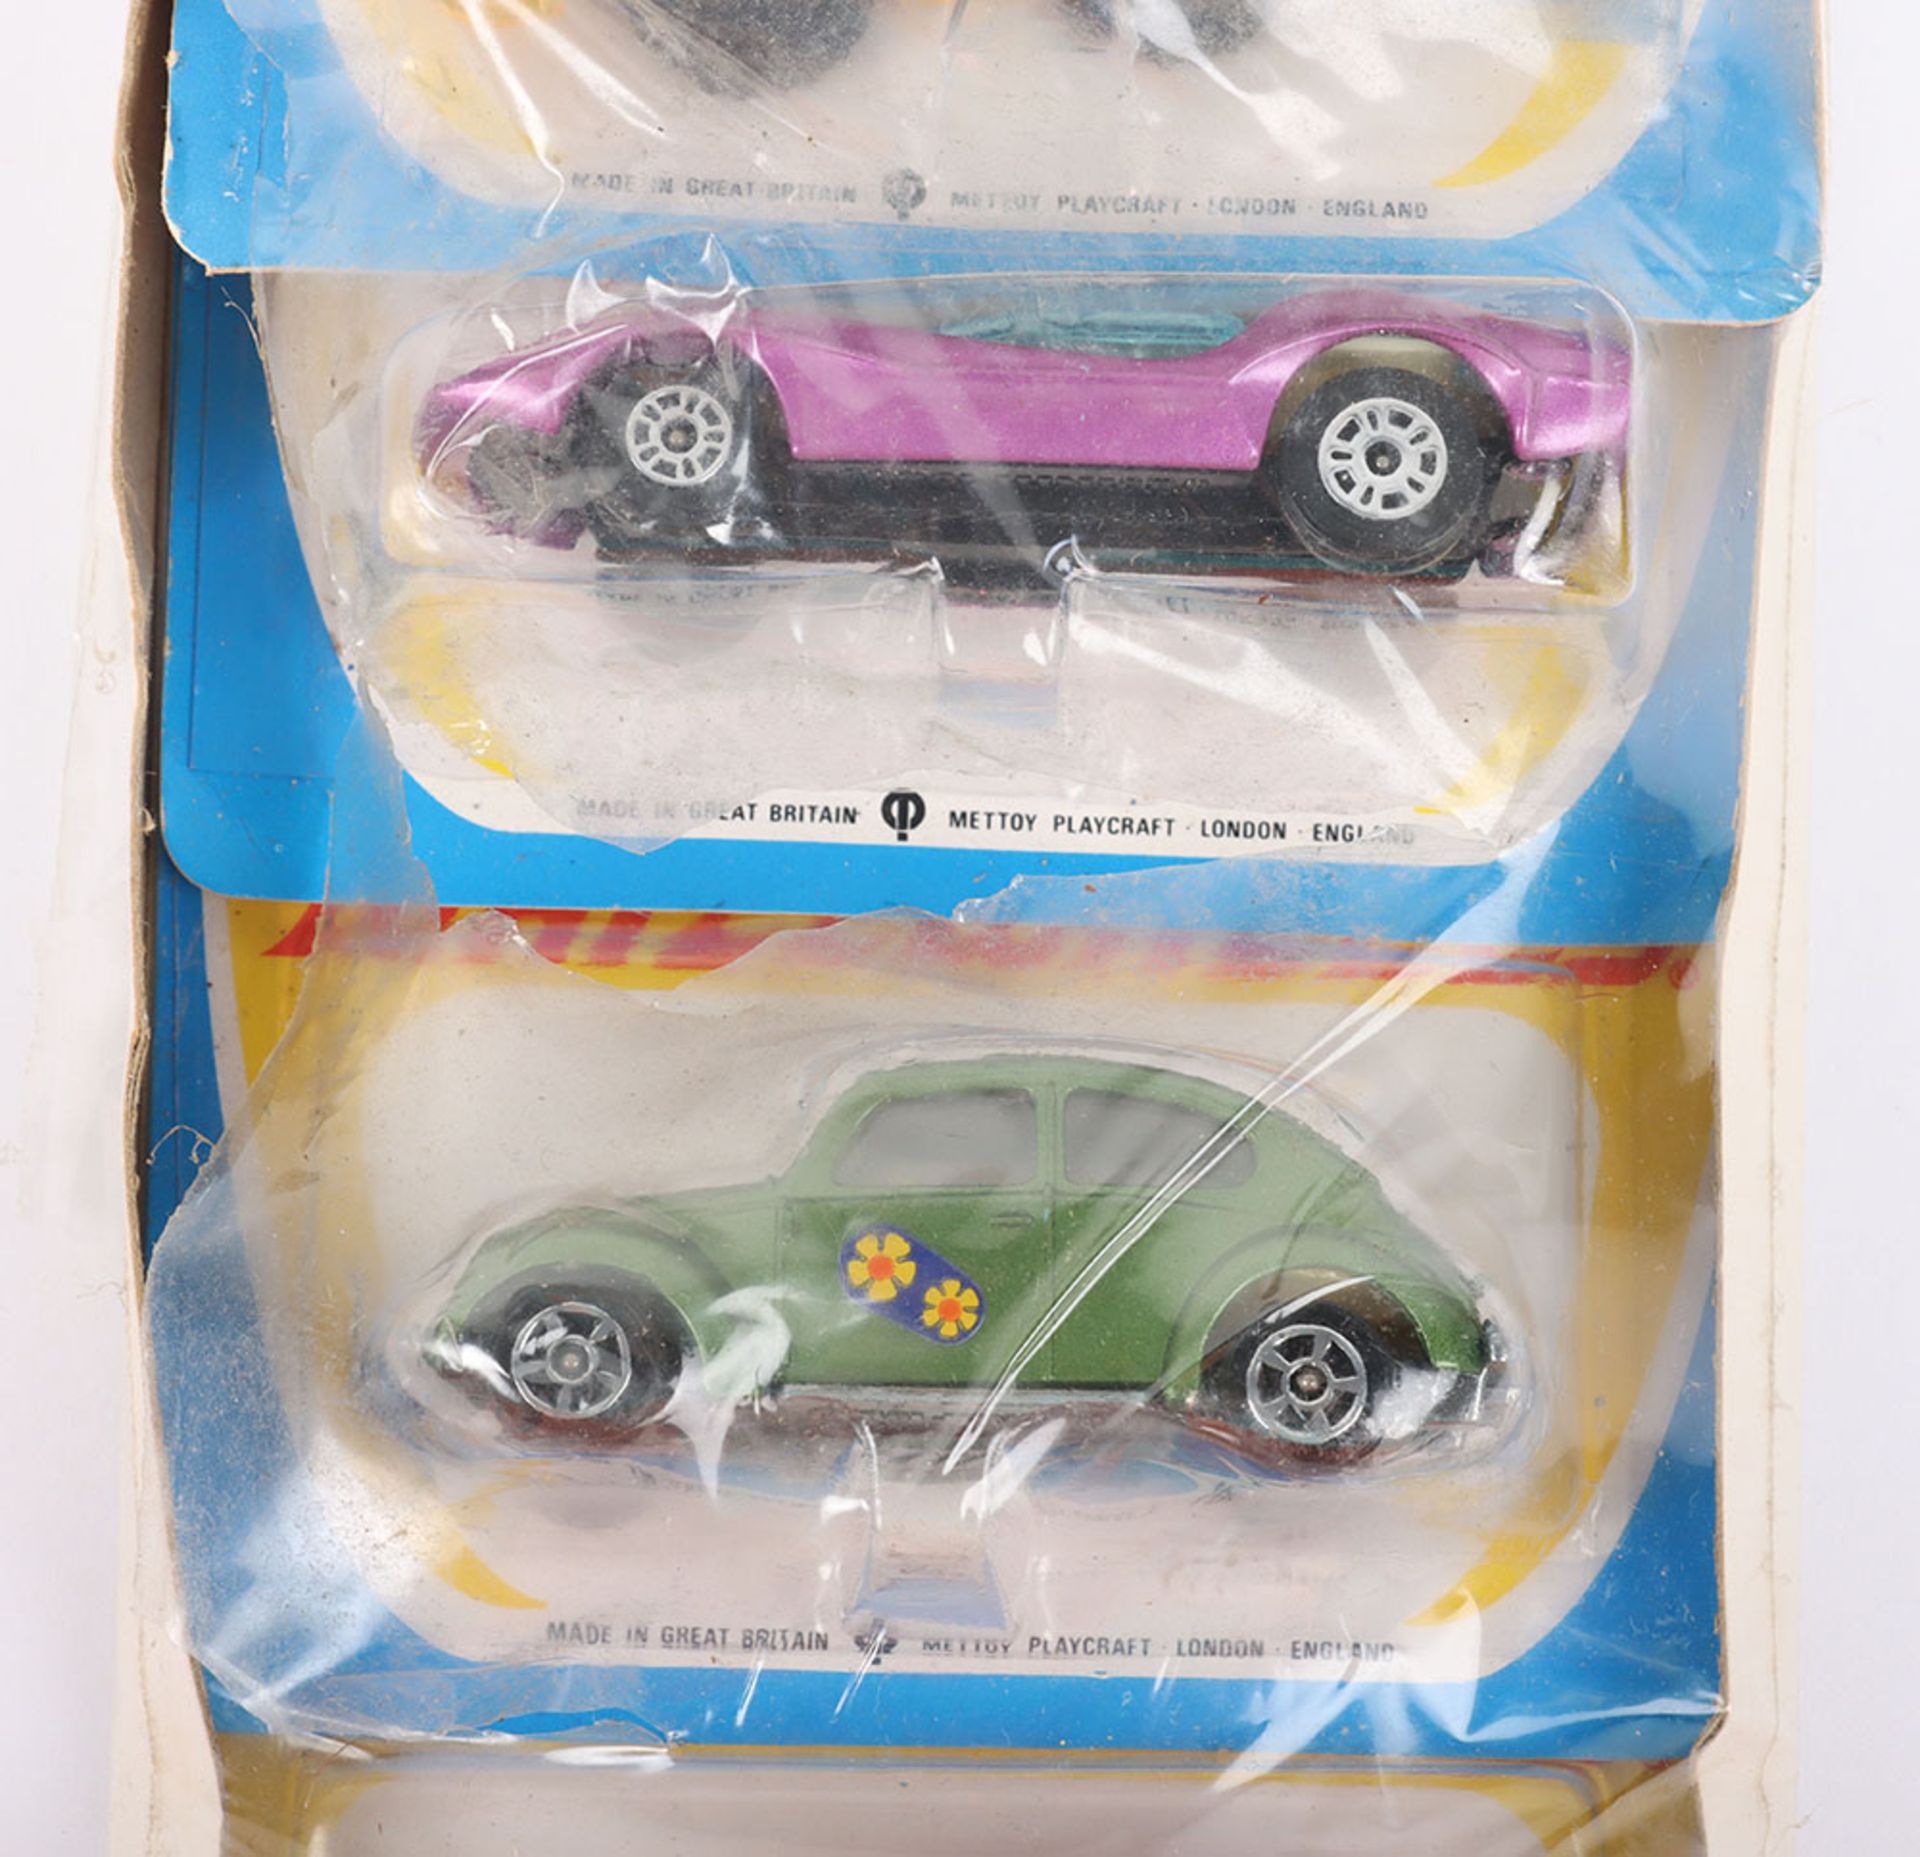 Six Carded Corgi Junior Models with collectors cards Shrunk Wrapped - Image 3 of 7